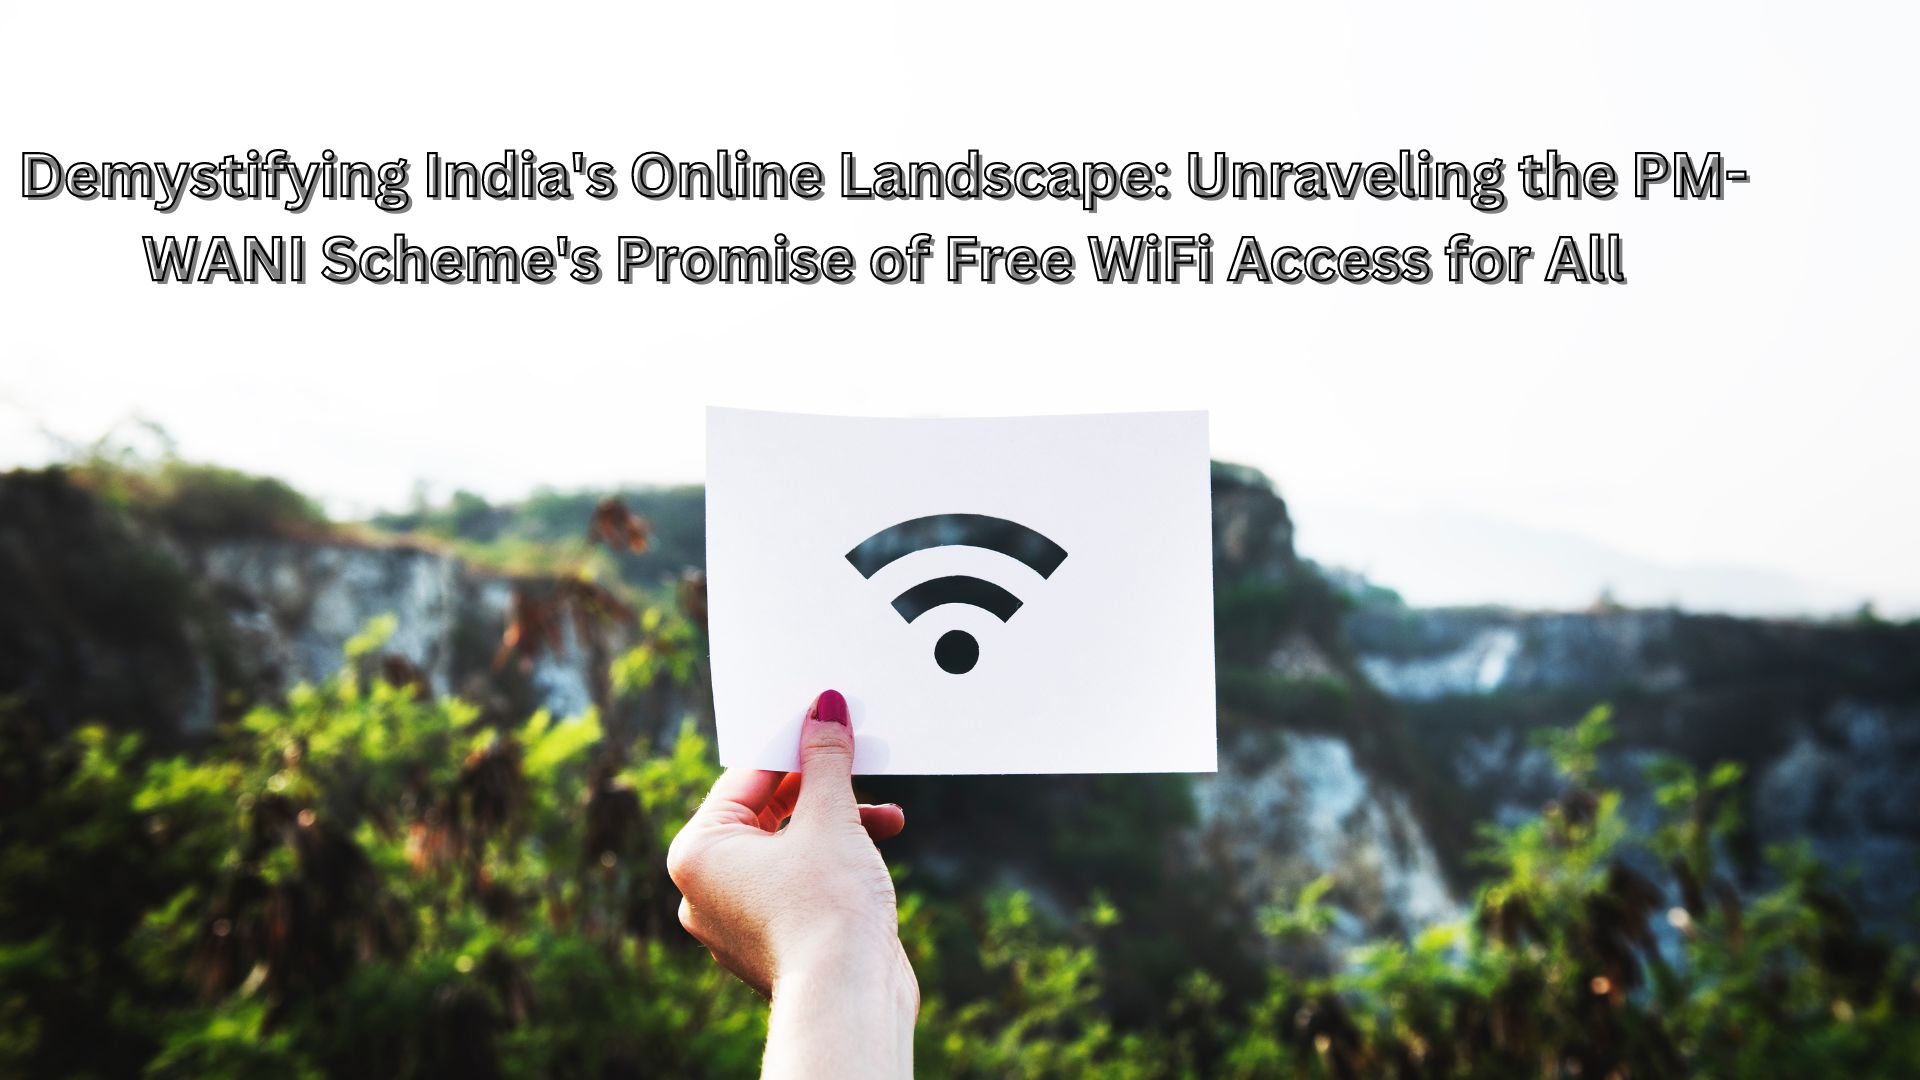 Demystifying India's Online Landscape: Unraveling the PM-WANI Scheme's Promise of Free WiFi Access for All